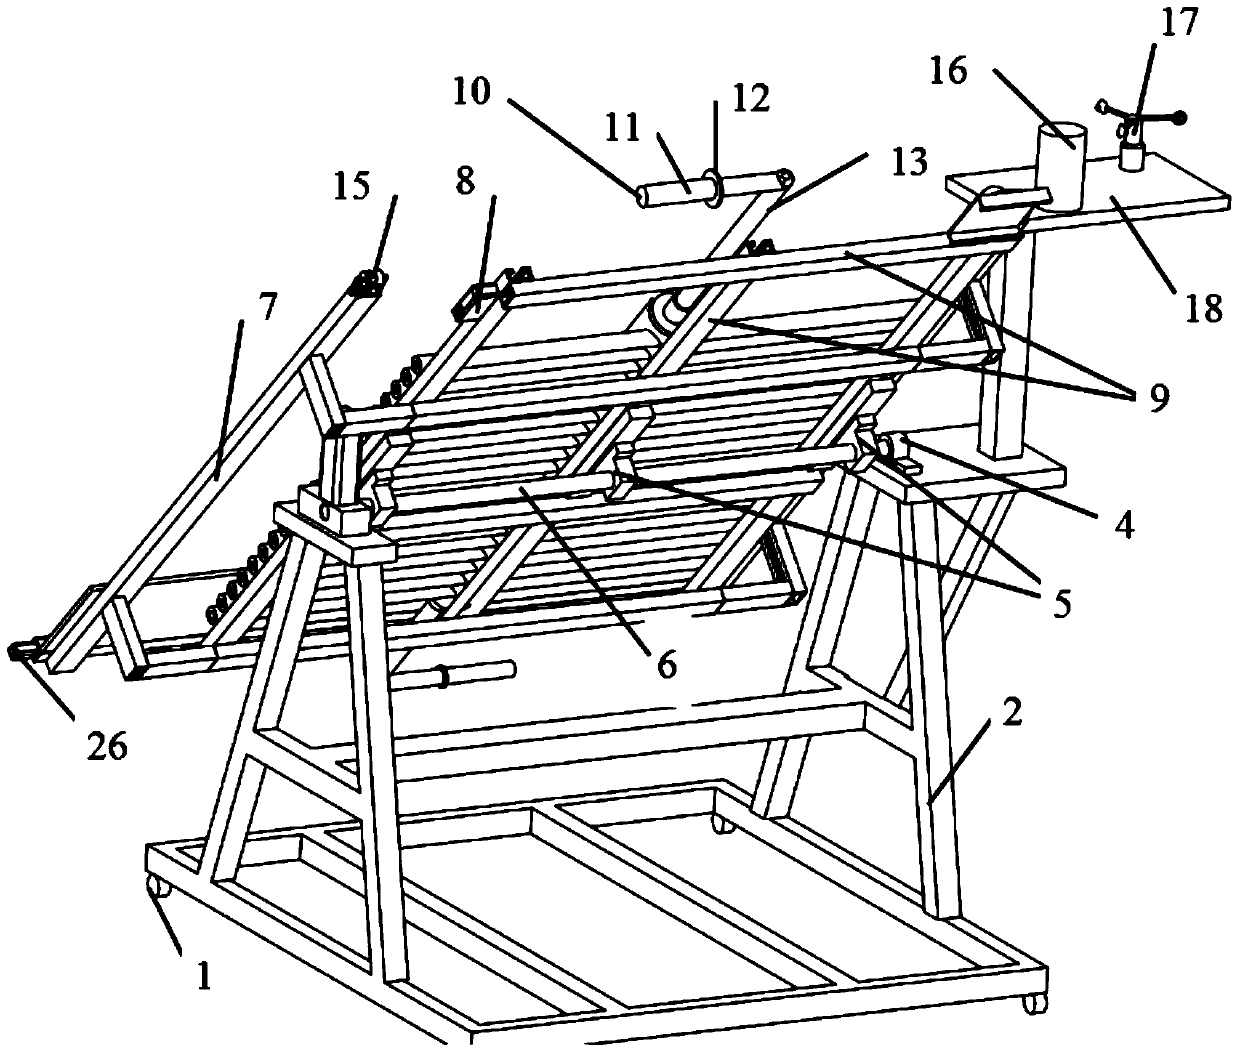 Loading device for thermal performance testing of solar air collectors